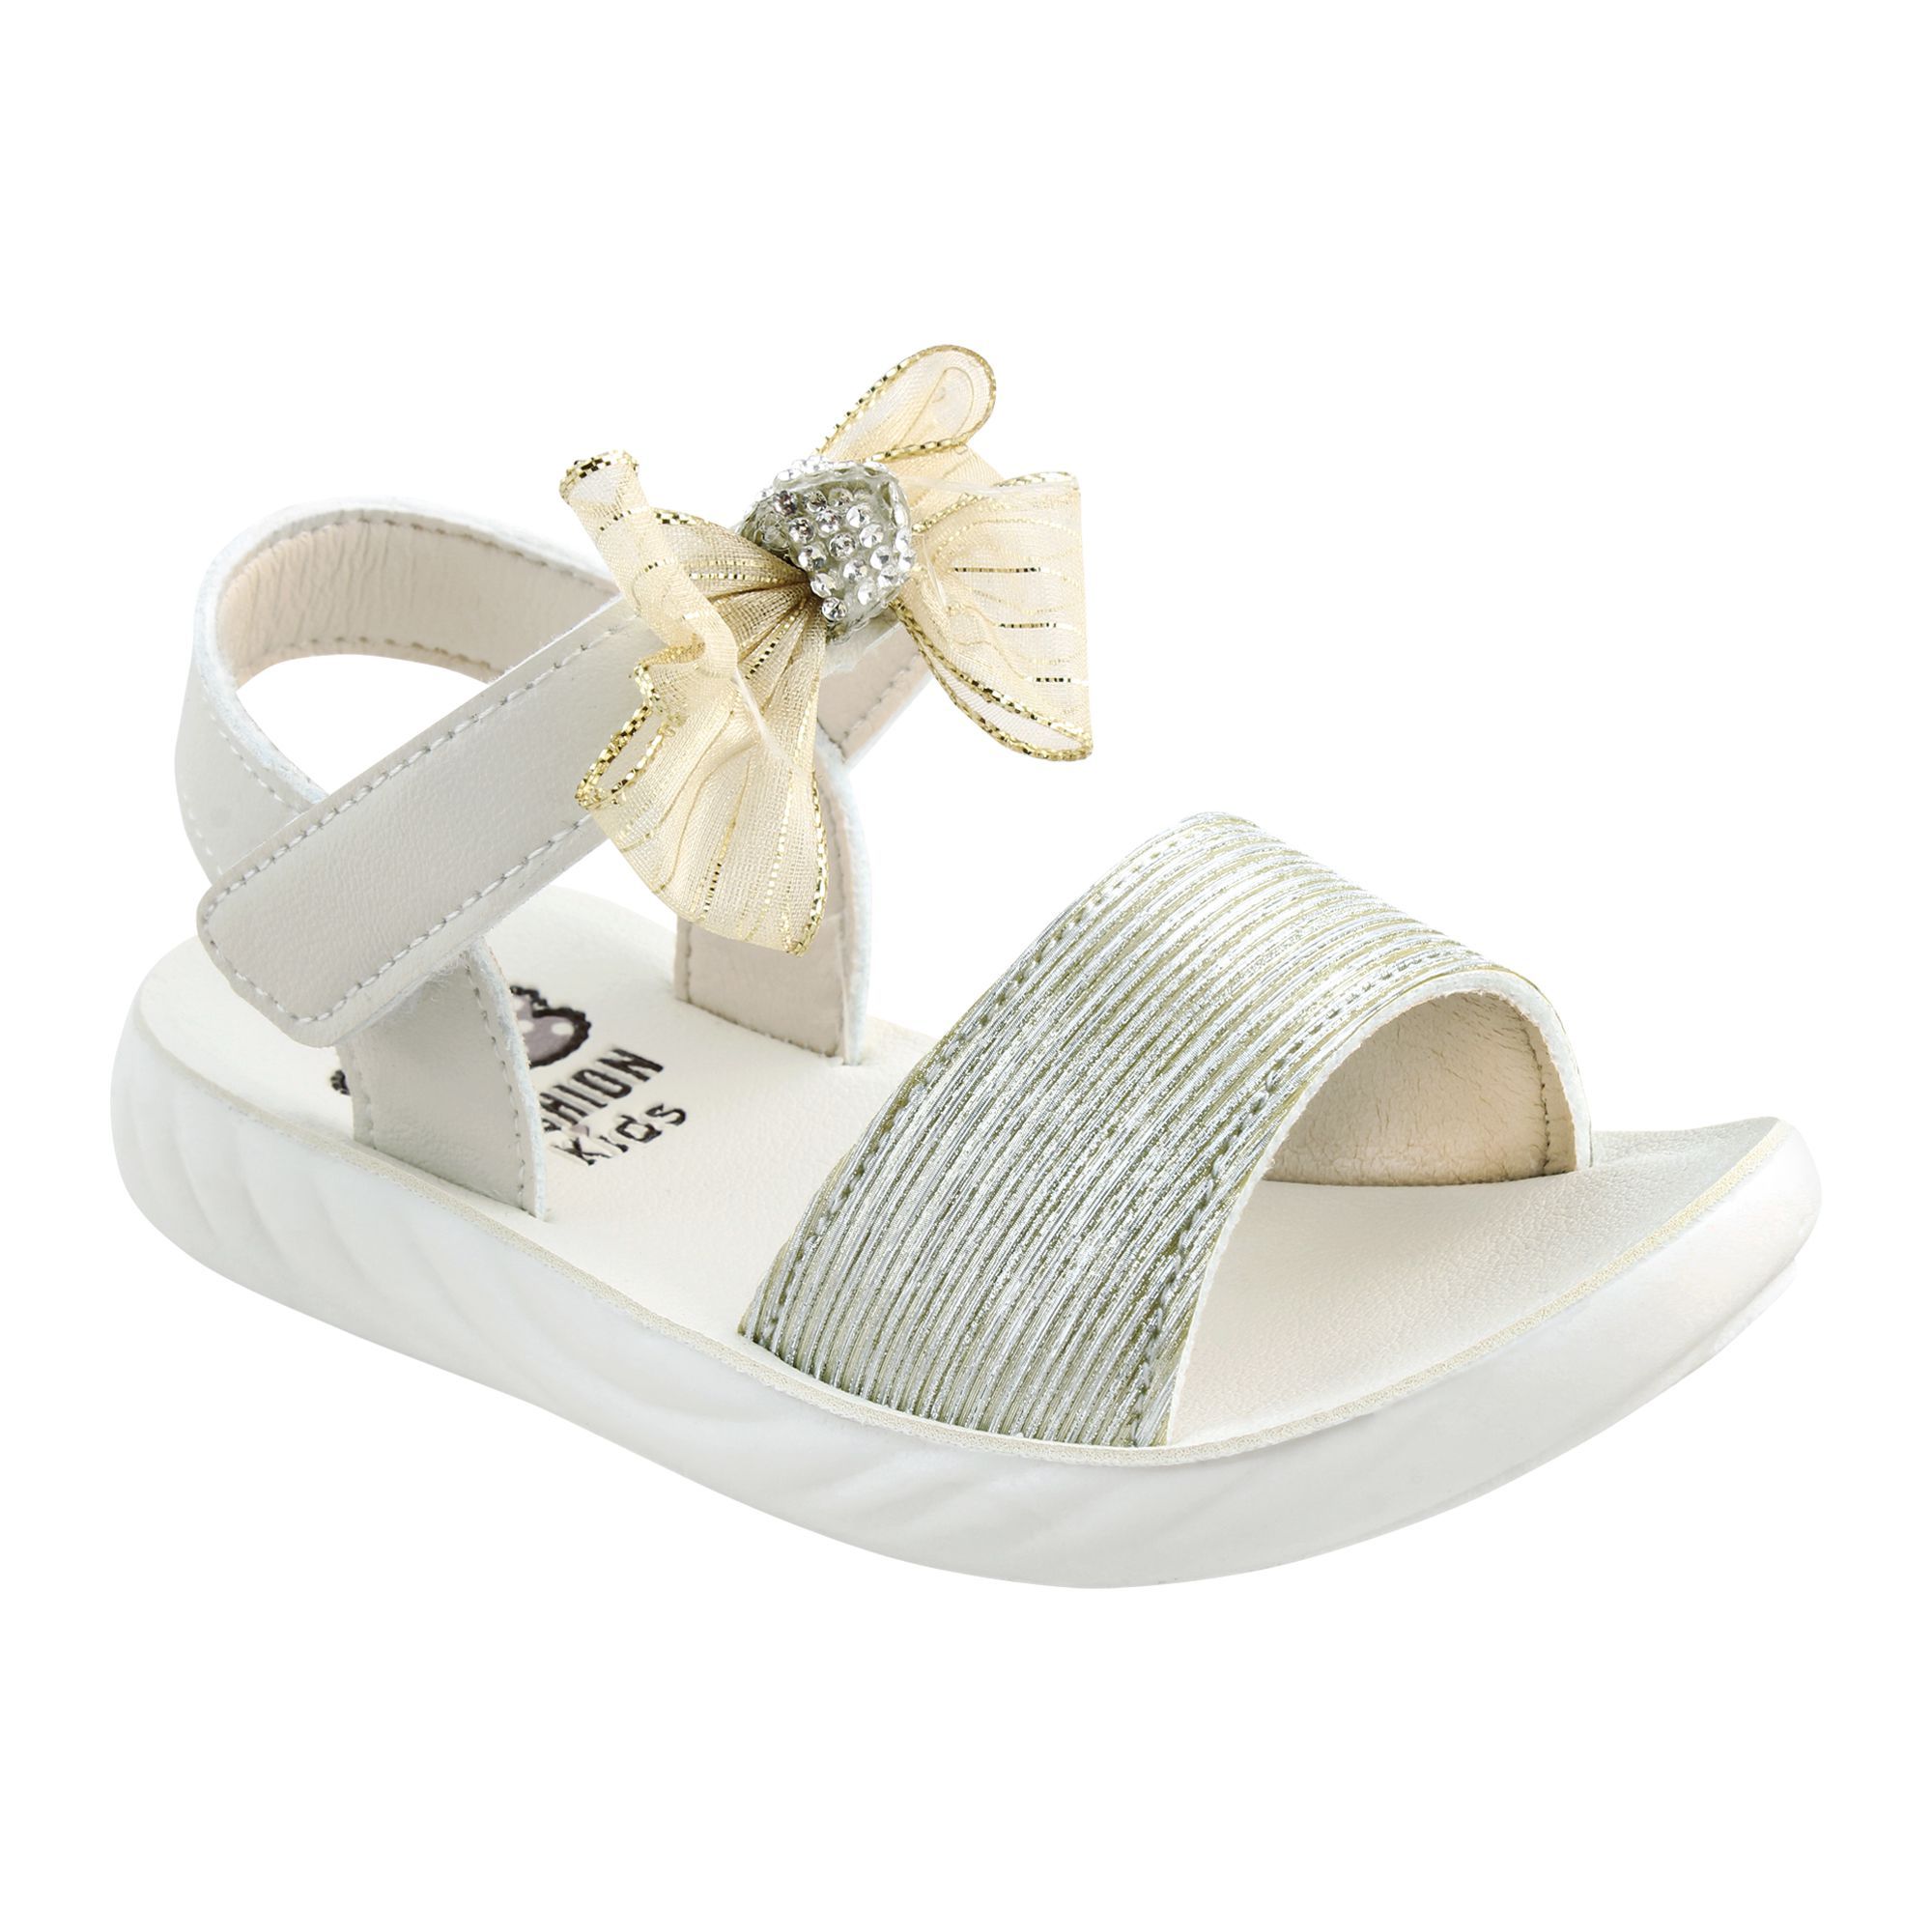 Buy Kids Sandals, For Girls, A-2, Golden Online at Special Price in ...